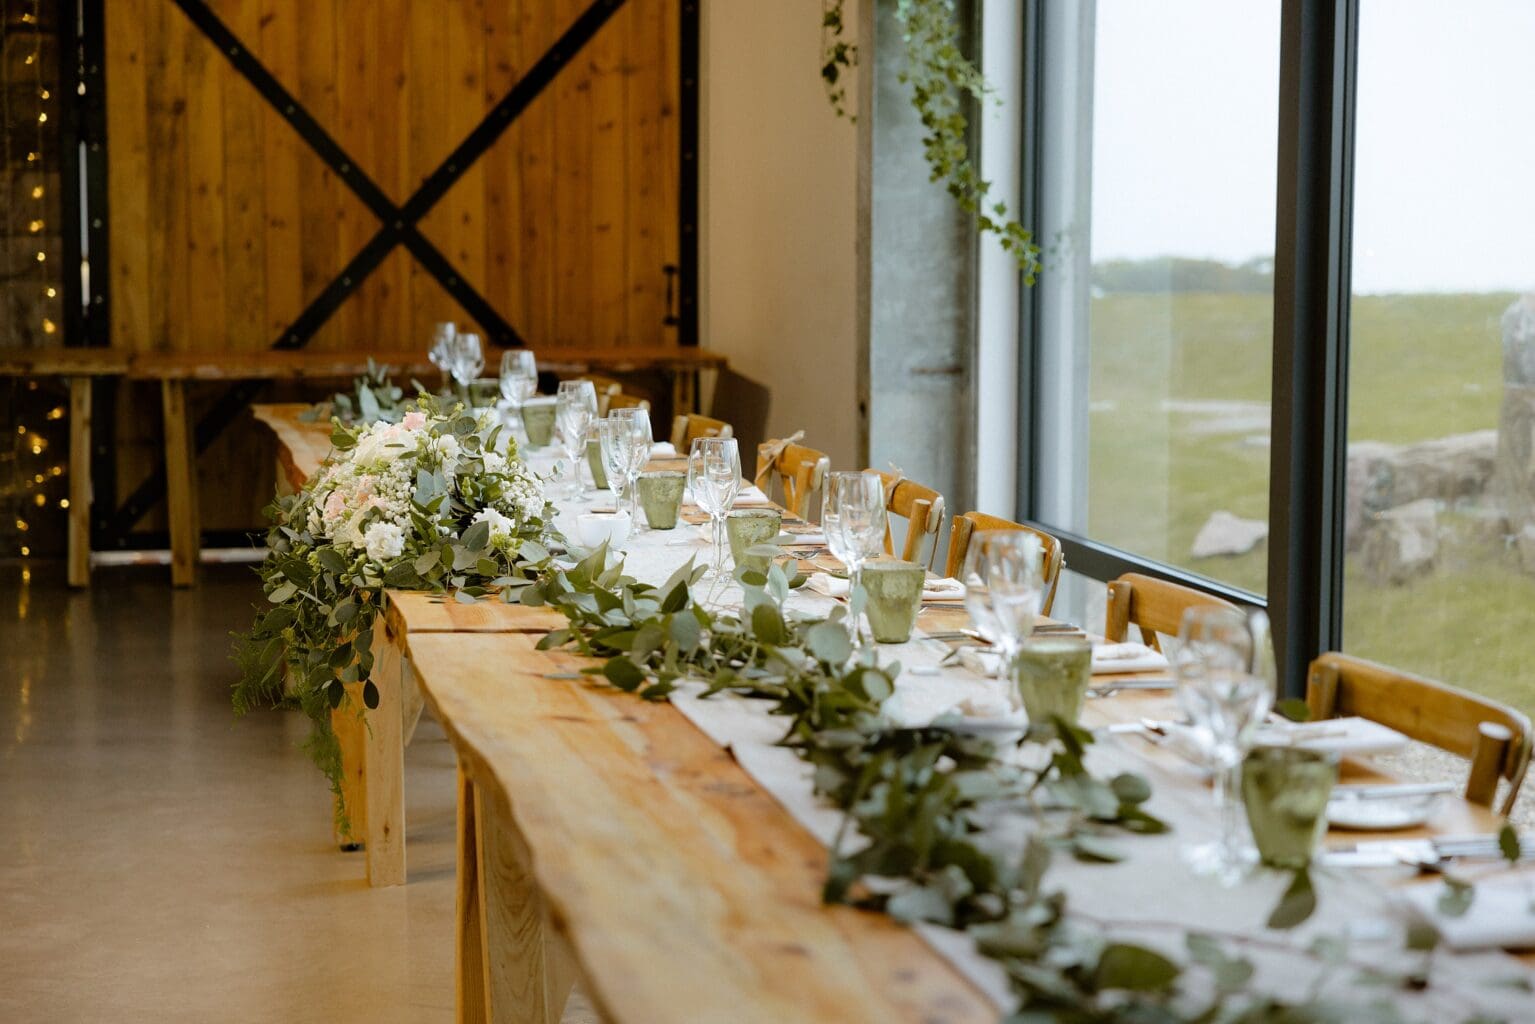 the top table set for dinner with glassware and greenery at barn wedding venues west lothian a large window wooden paneling and stings of fairy lights are visible in the background